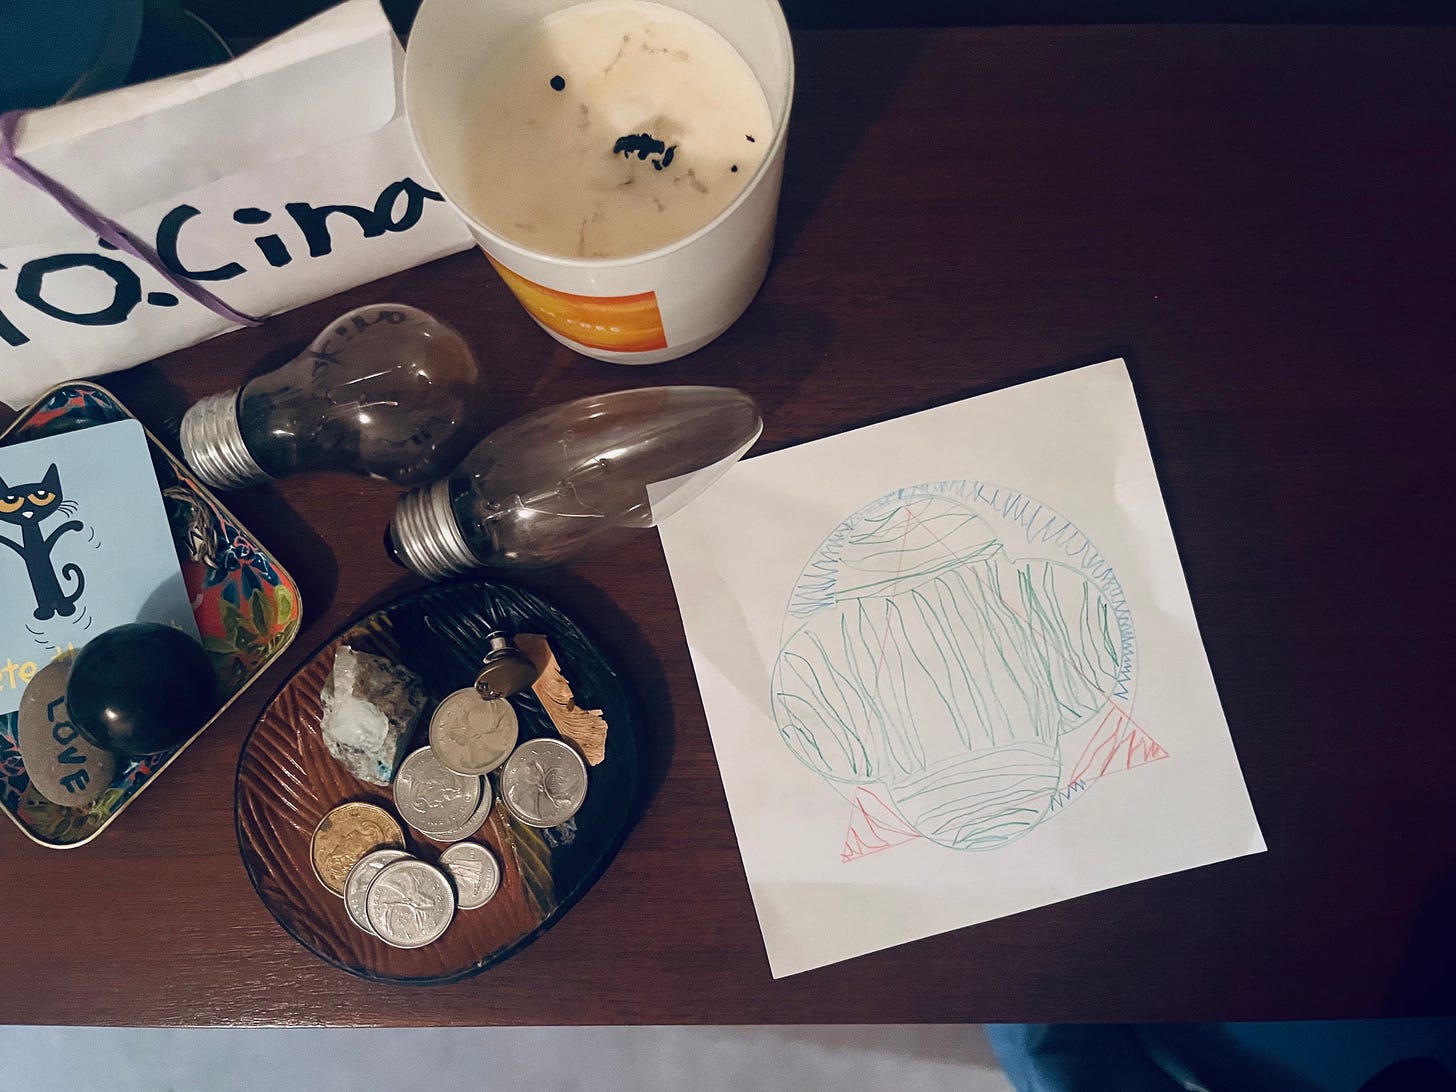 Aerial view of the sideboard that holds two blackened lightbulbs, a dirty candle, a pile of change, a Pete the cat tarot card, a rock on which is written “love” in a child’s handwriting, and a thick envelope that reads “to: cina” also in a child’s handwriting